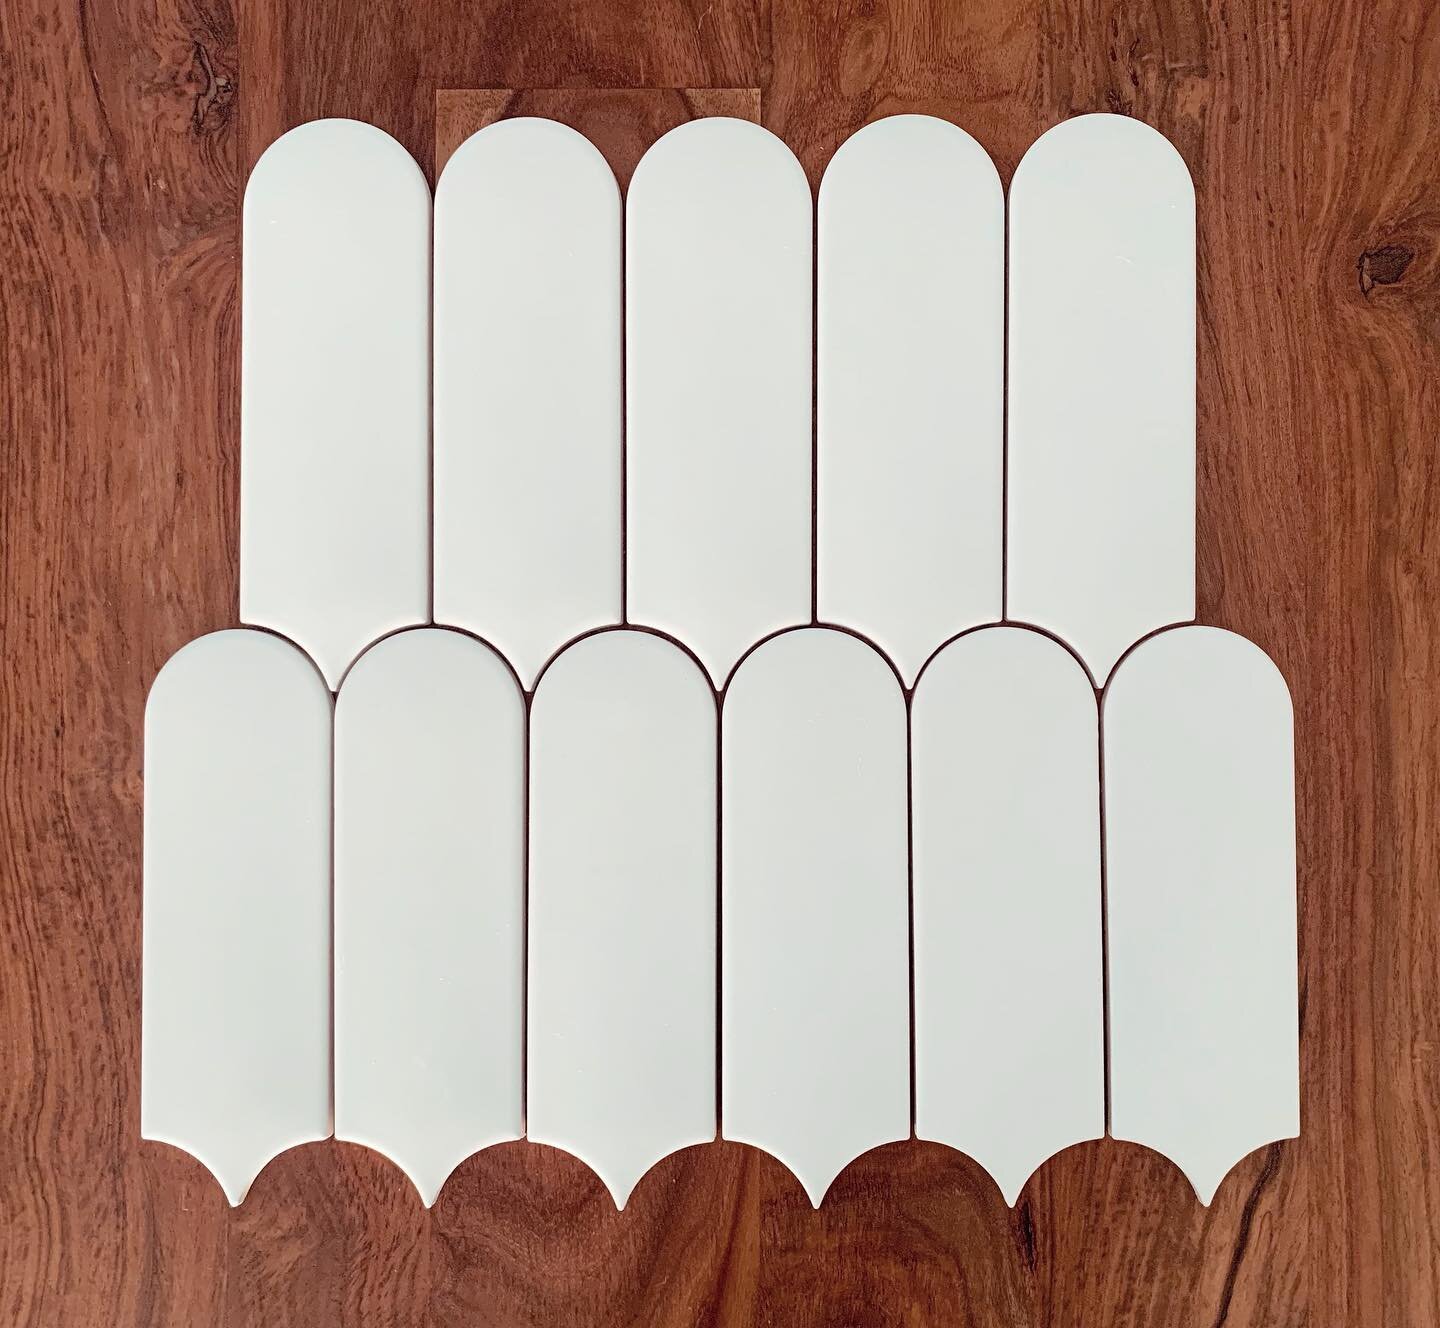 Backsplash tile for the kitchen facelift at #SouthFloridaVillaByTheSea 🍊 is here! She&rsquo;s a Beauty 🤍 Canceling the &ldquo;Miami modern&rdquo; developer aesthetic one tile at a time. IYKYK and if you don&rsquo;t, it&rsquo;s a lot of white &amp; 